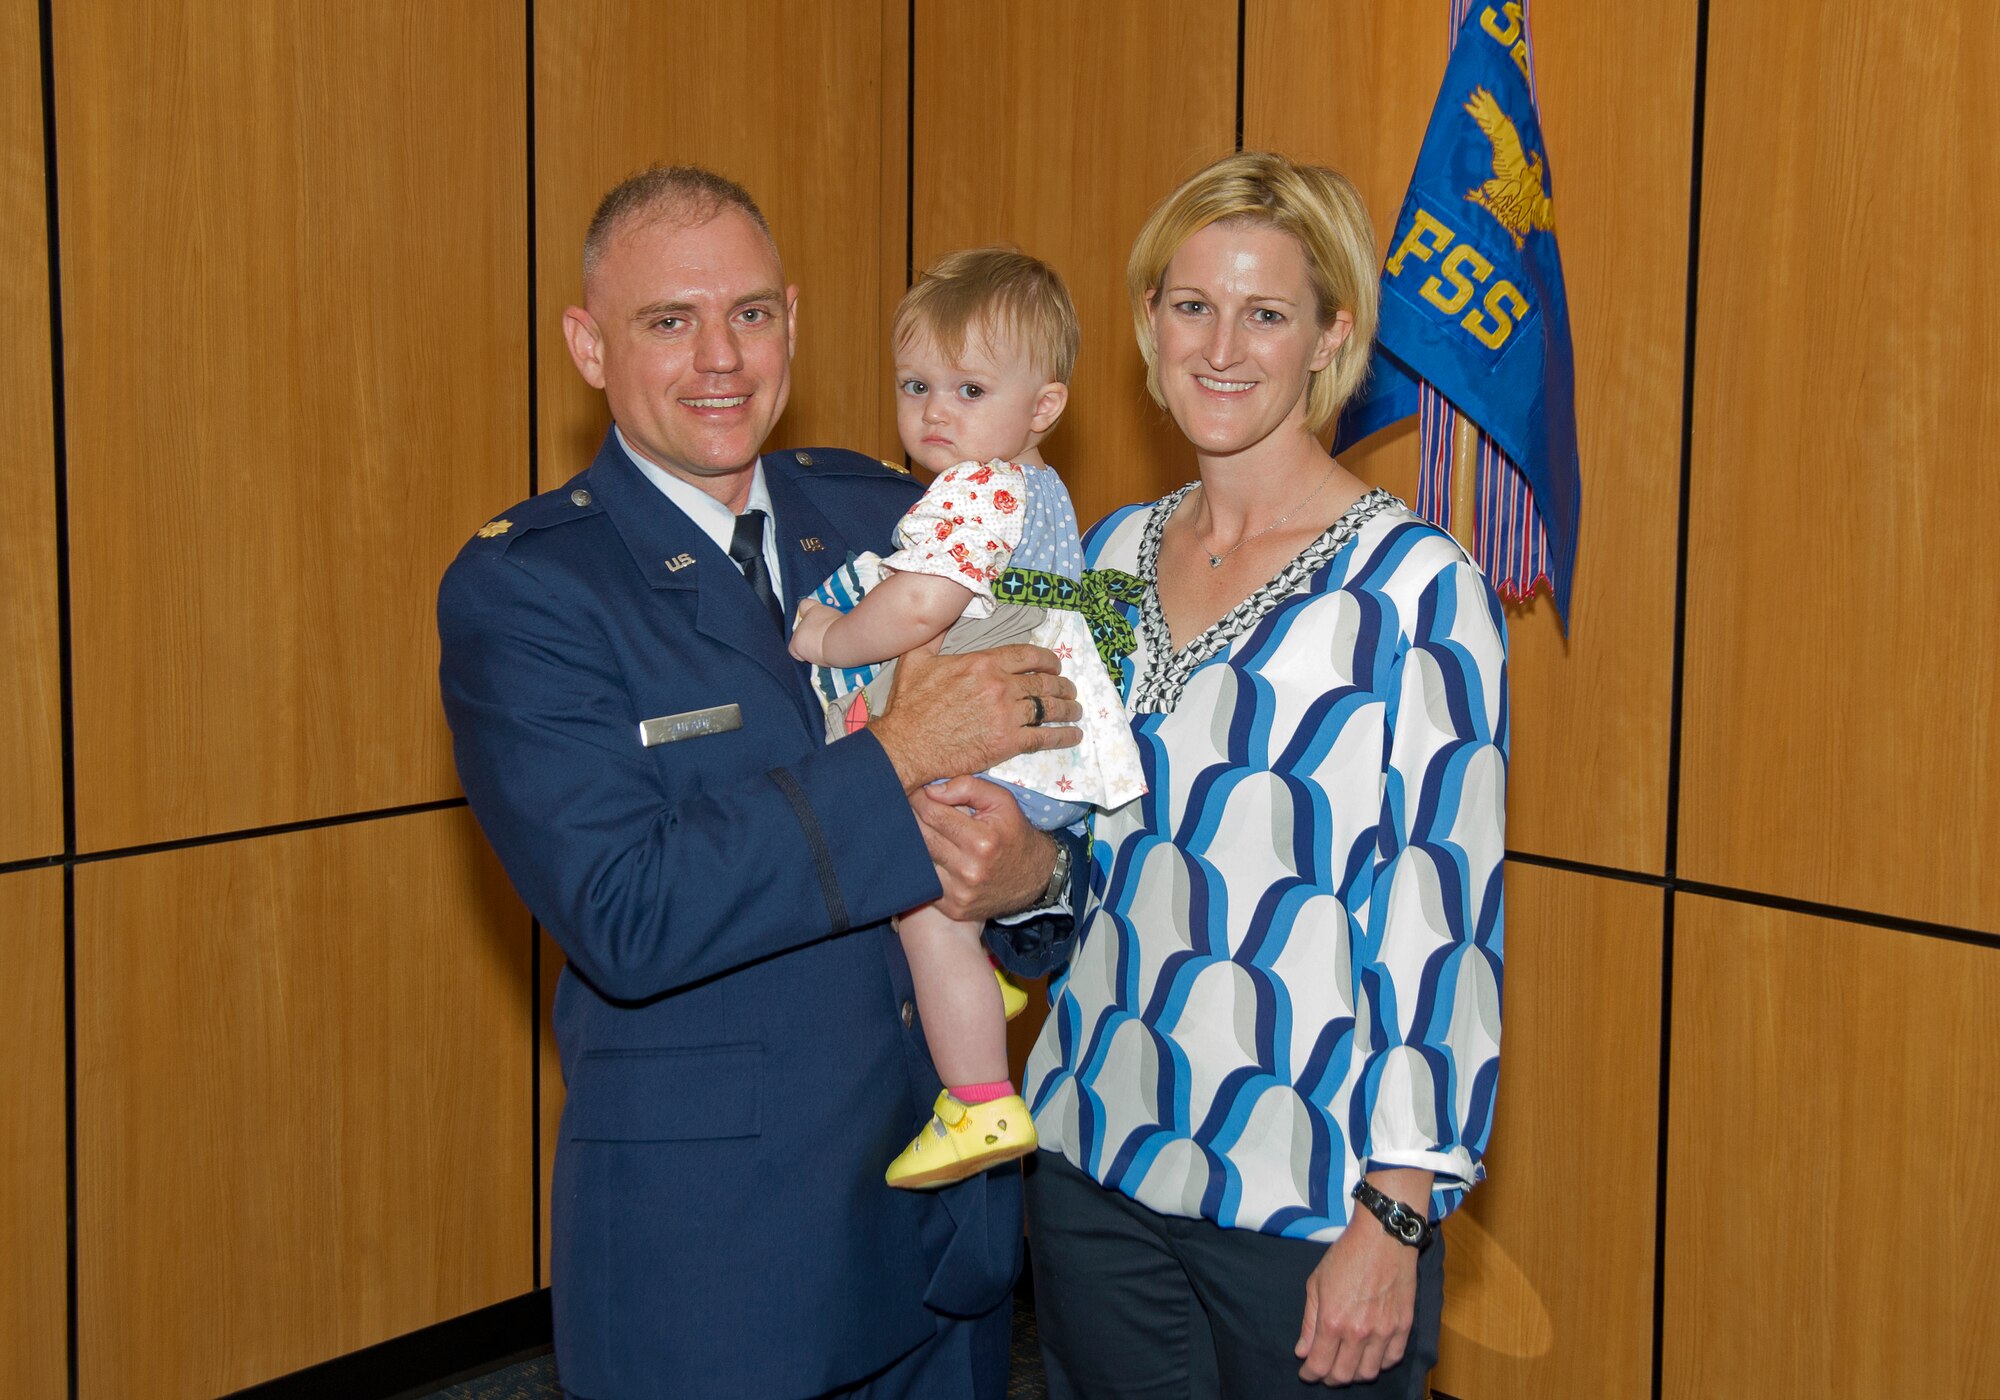 Major John Zulauf, 325th Force Support Squadron commander, and his family get their picture taken at his change of command ceremony June 6. Zulauf and his wife, Marisa, are looking forward to their time at Tyndall with their 15-month-old daughter. (U.S. Air Force photo by Airman 1st Class Alex Echols)